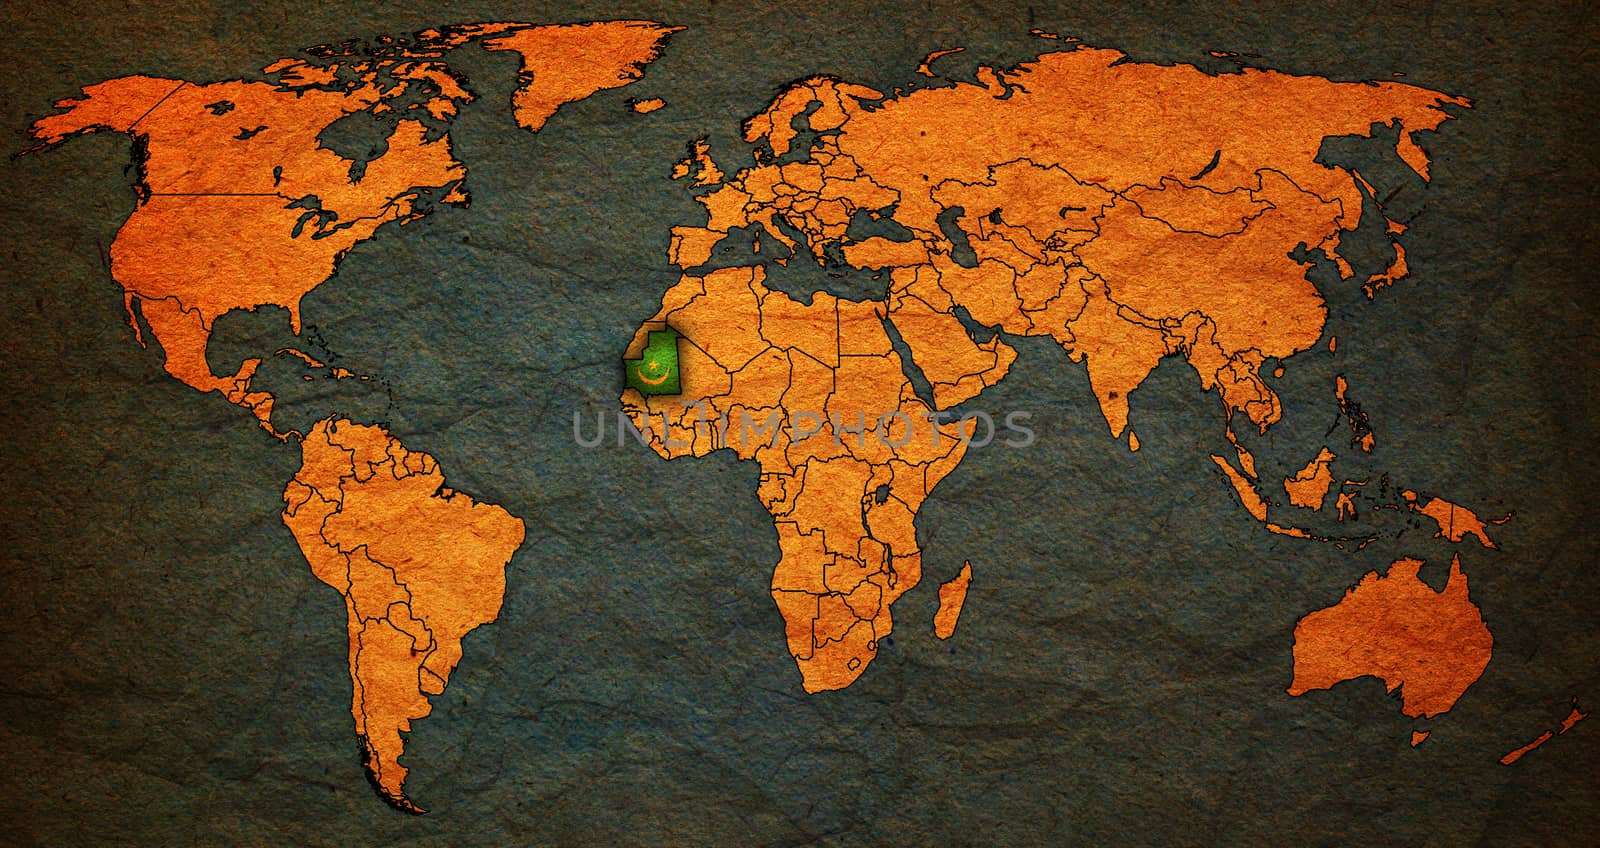 mauritania territory on world map by michal812